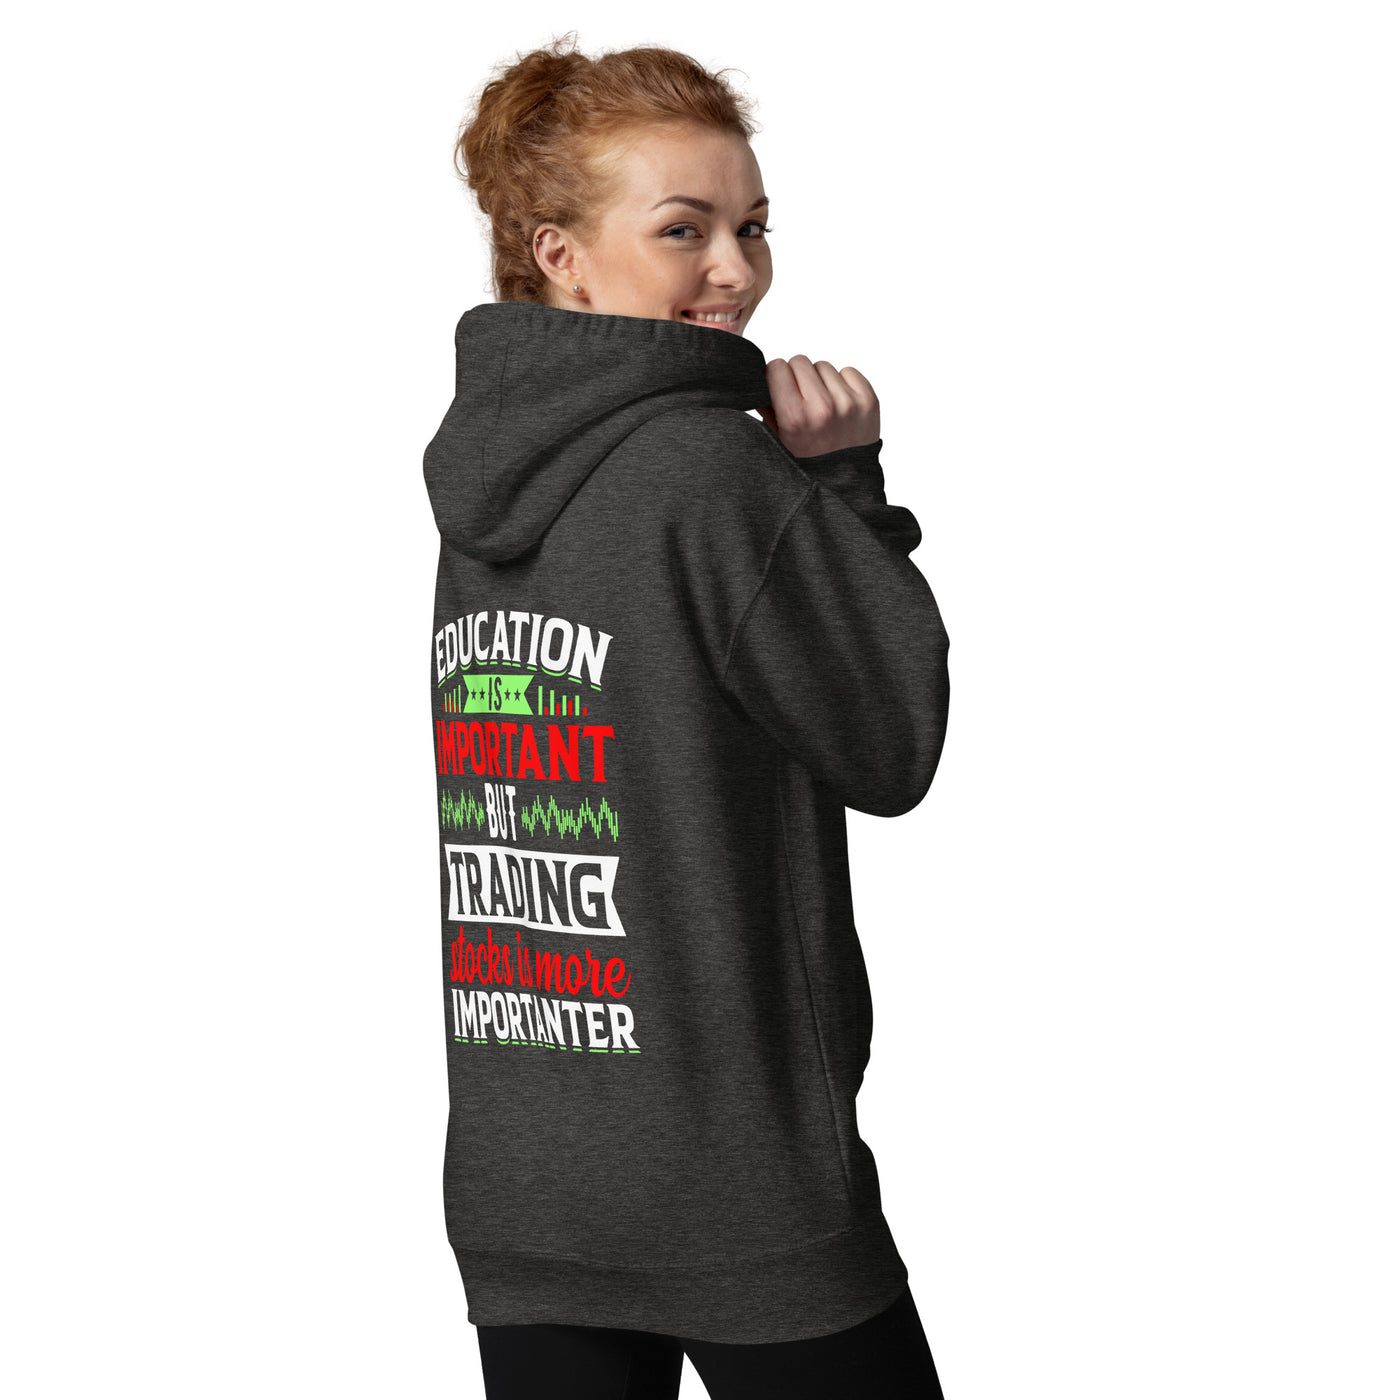 Education is important but trading stocks is more importanter - Unisex Hoodie ( Back Print )